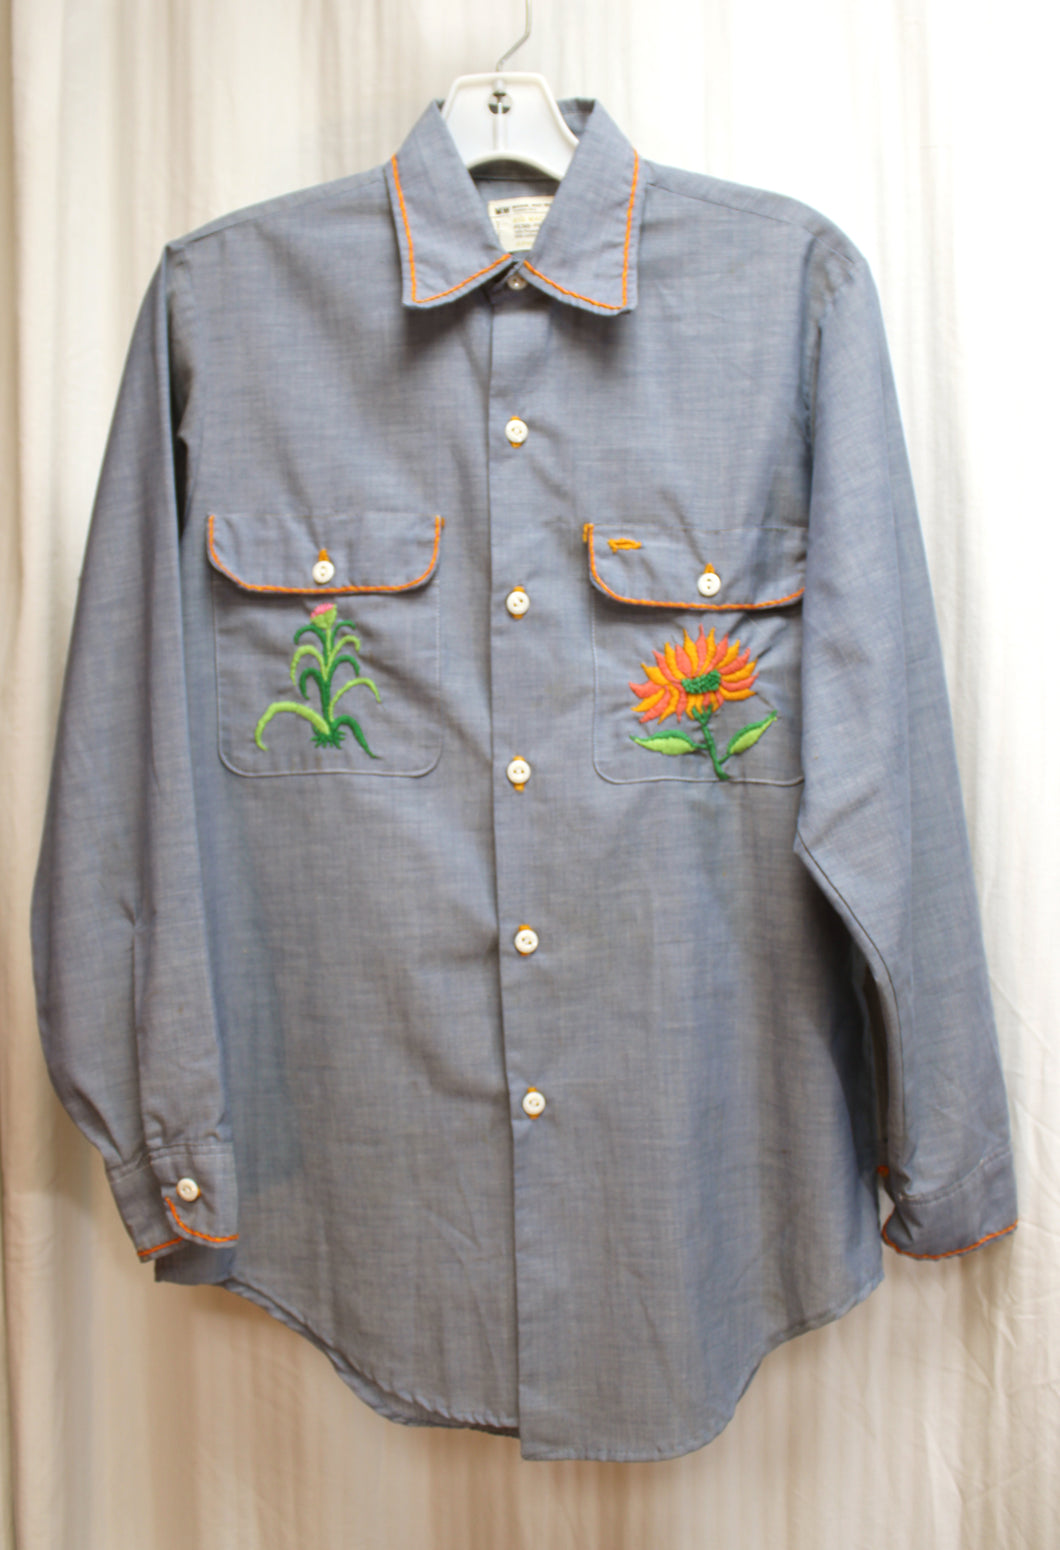 Vintage 1970's - JC Penney Big Mac Penn-Prest - Hand Embroidered Floral, Chambray Button Up Shirt - See Measurements 20